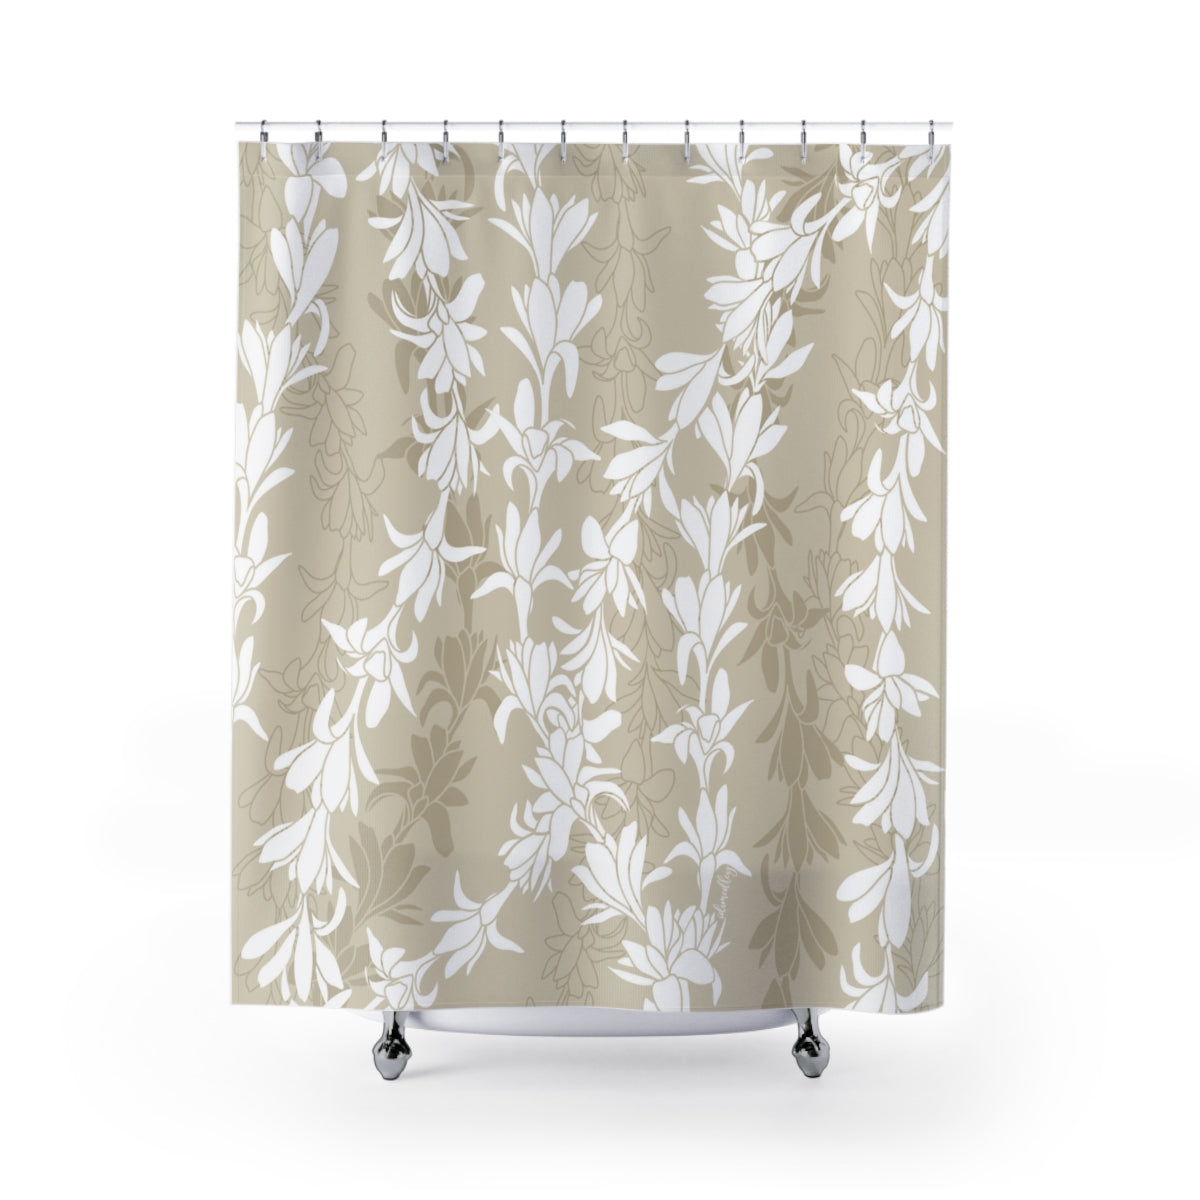 Shower Curtain- Tuberoses for Nohea (Sand)